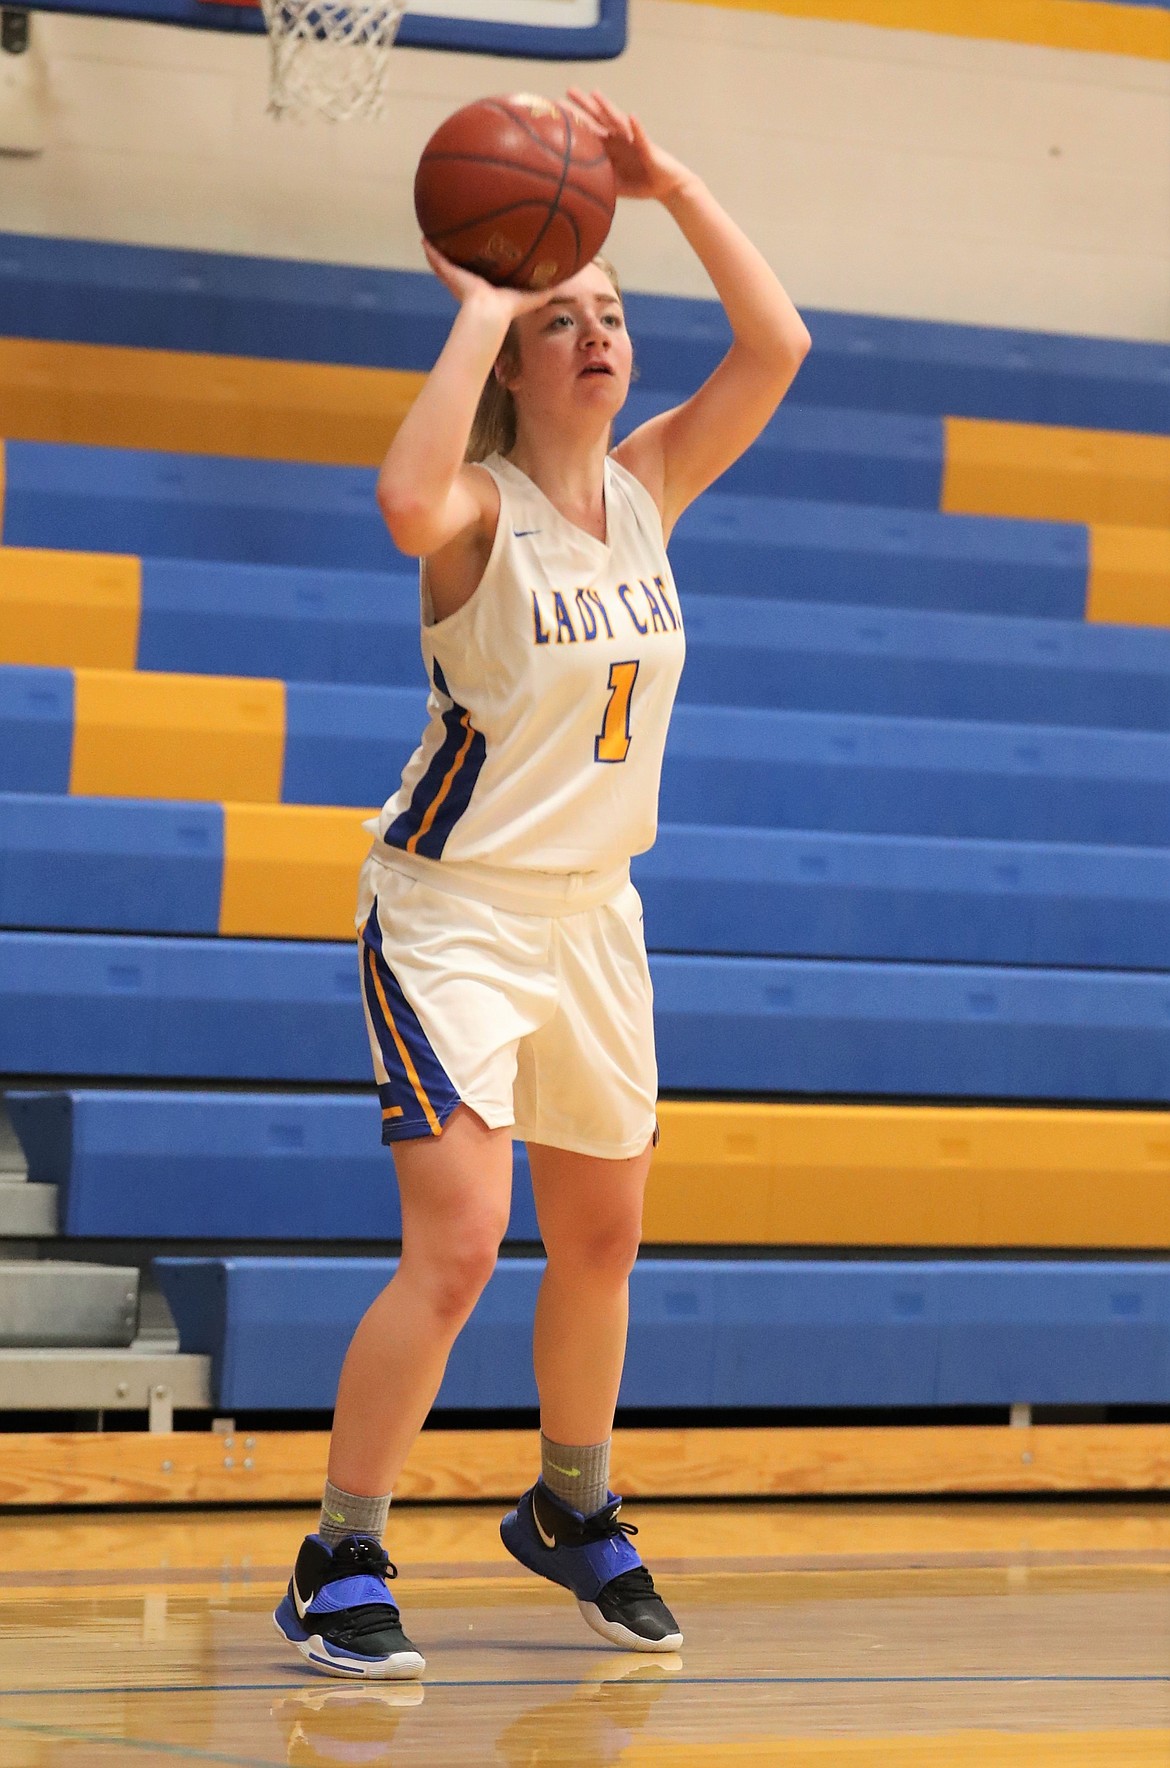 Junior Katelyn Matteson hits a 3-pointer in the closing seconds of Friday's game.